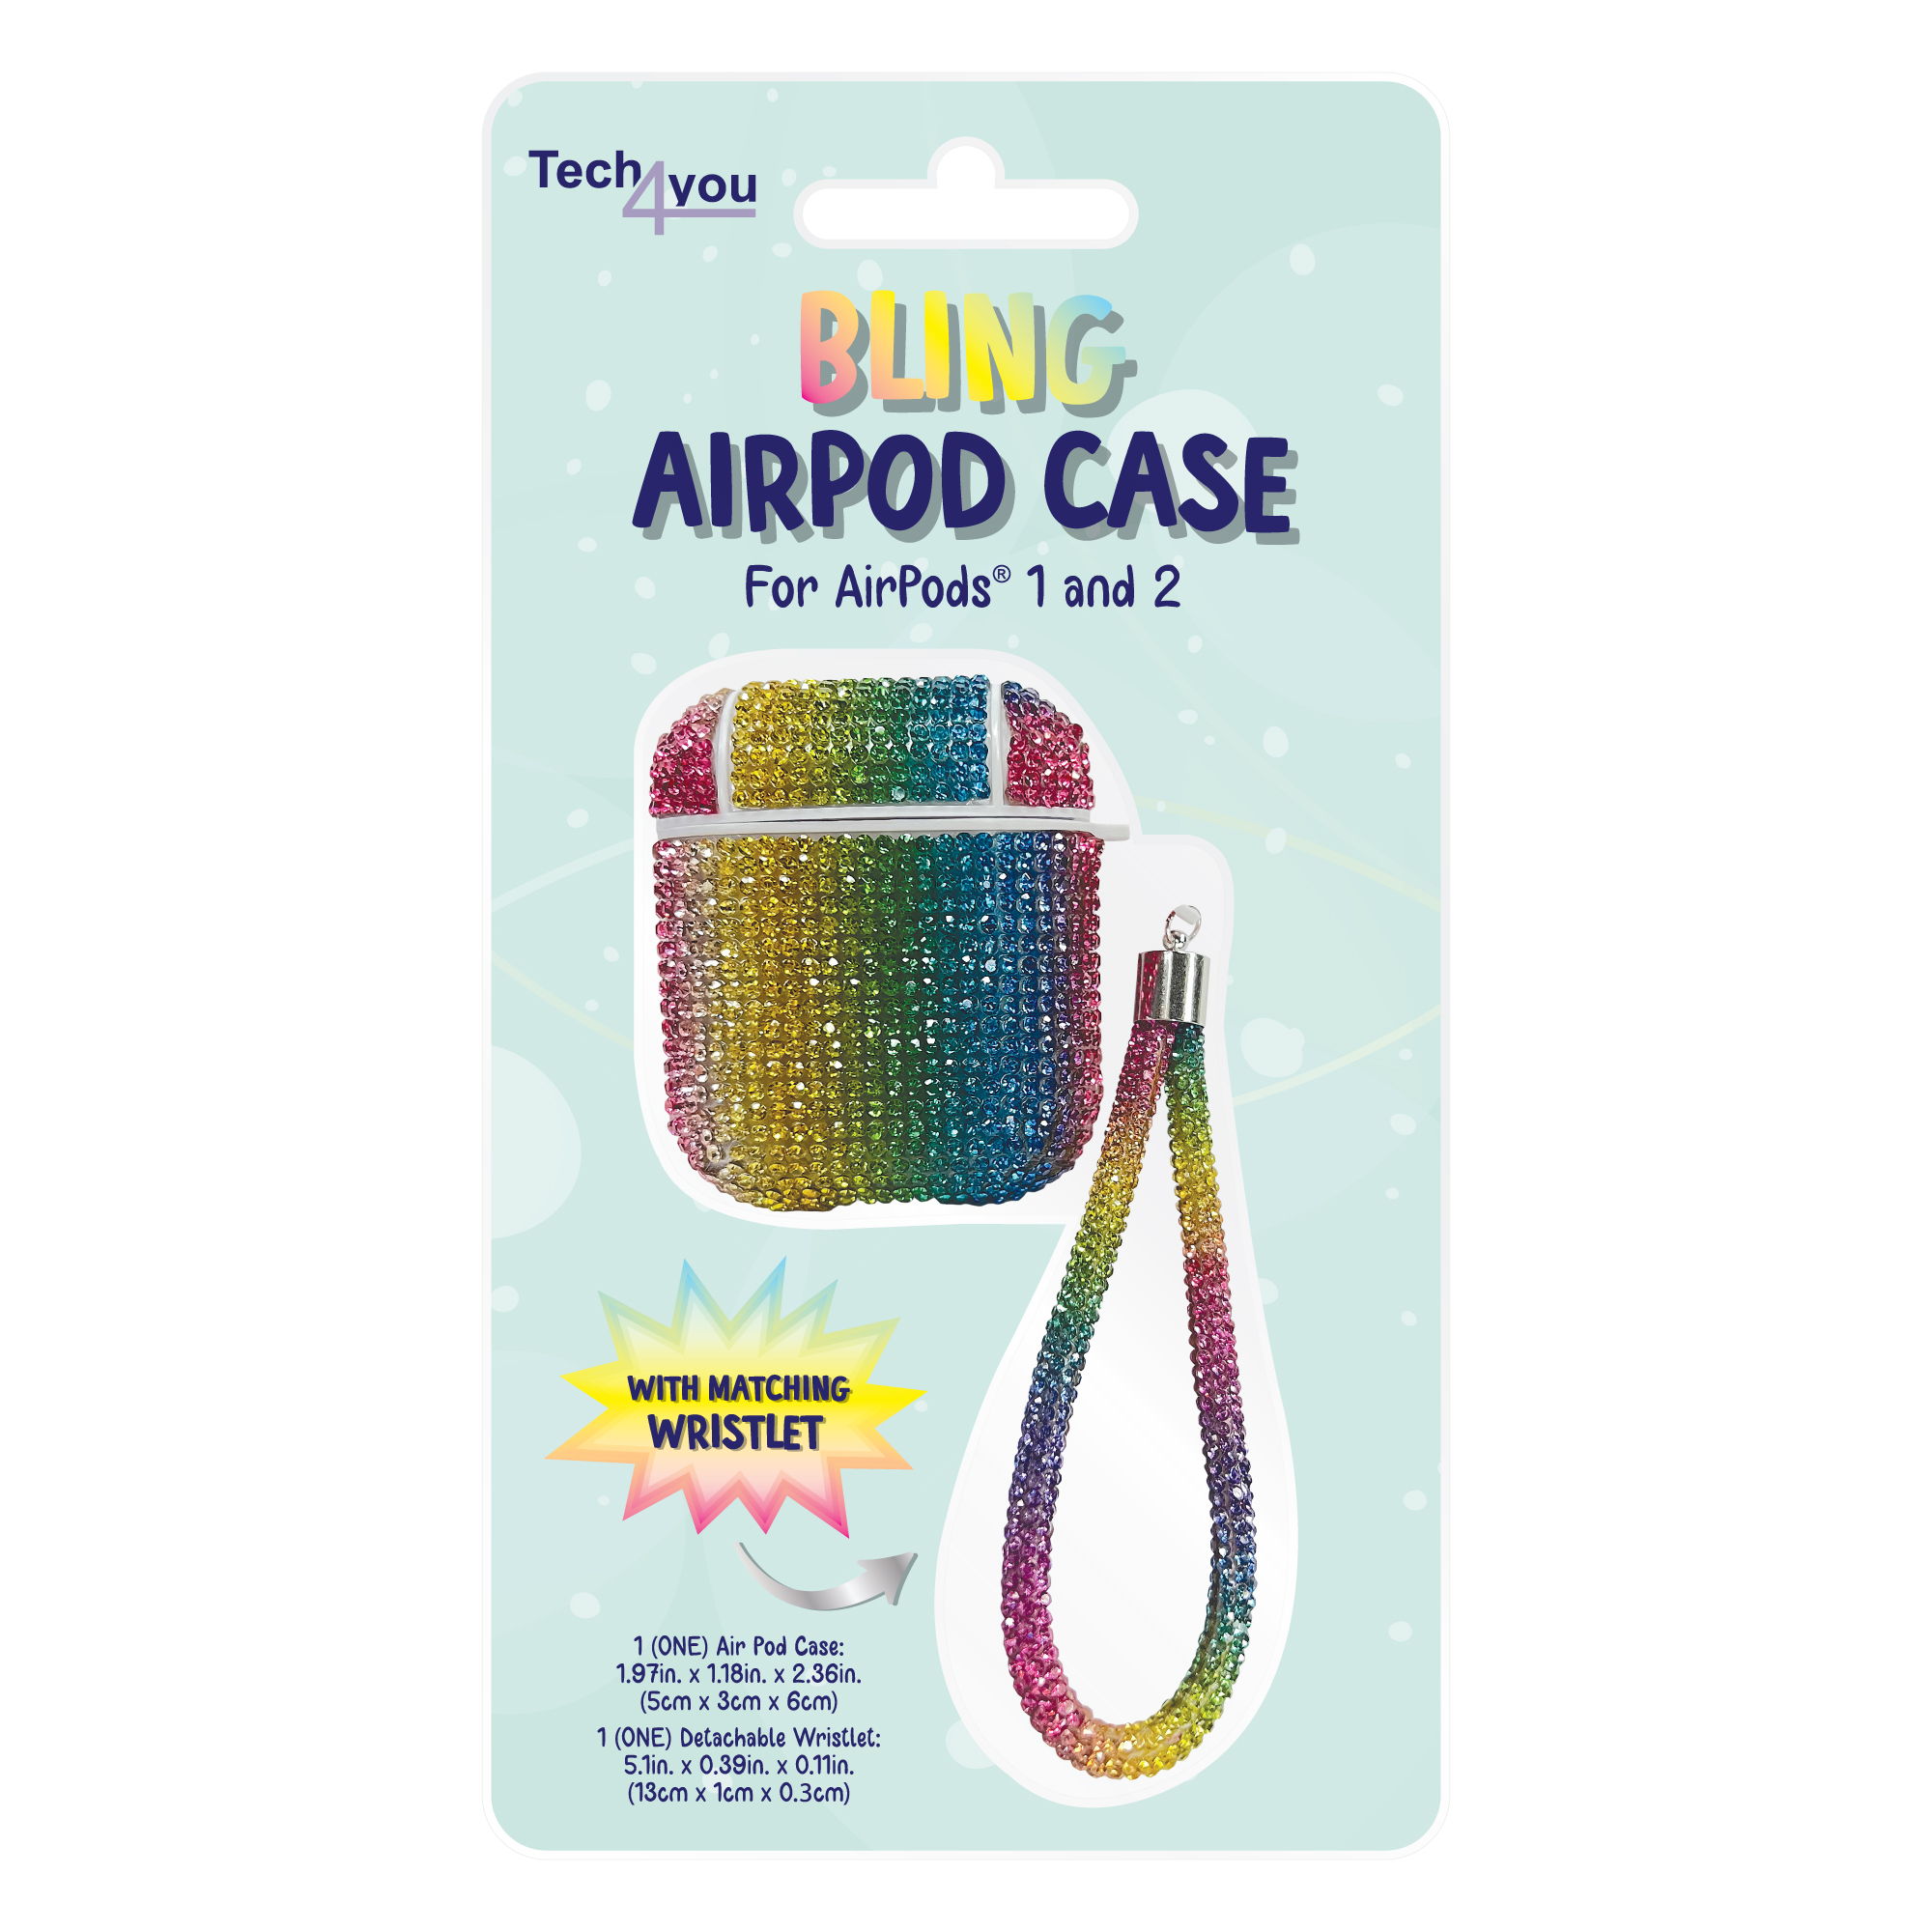 bling case with wristlet for AirPods® 1 & 2